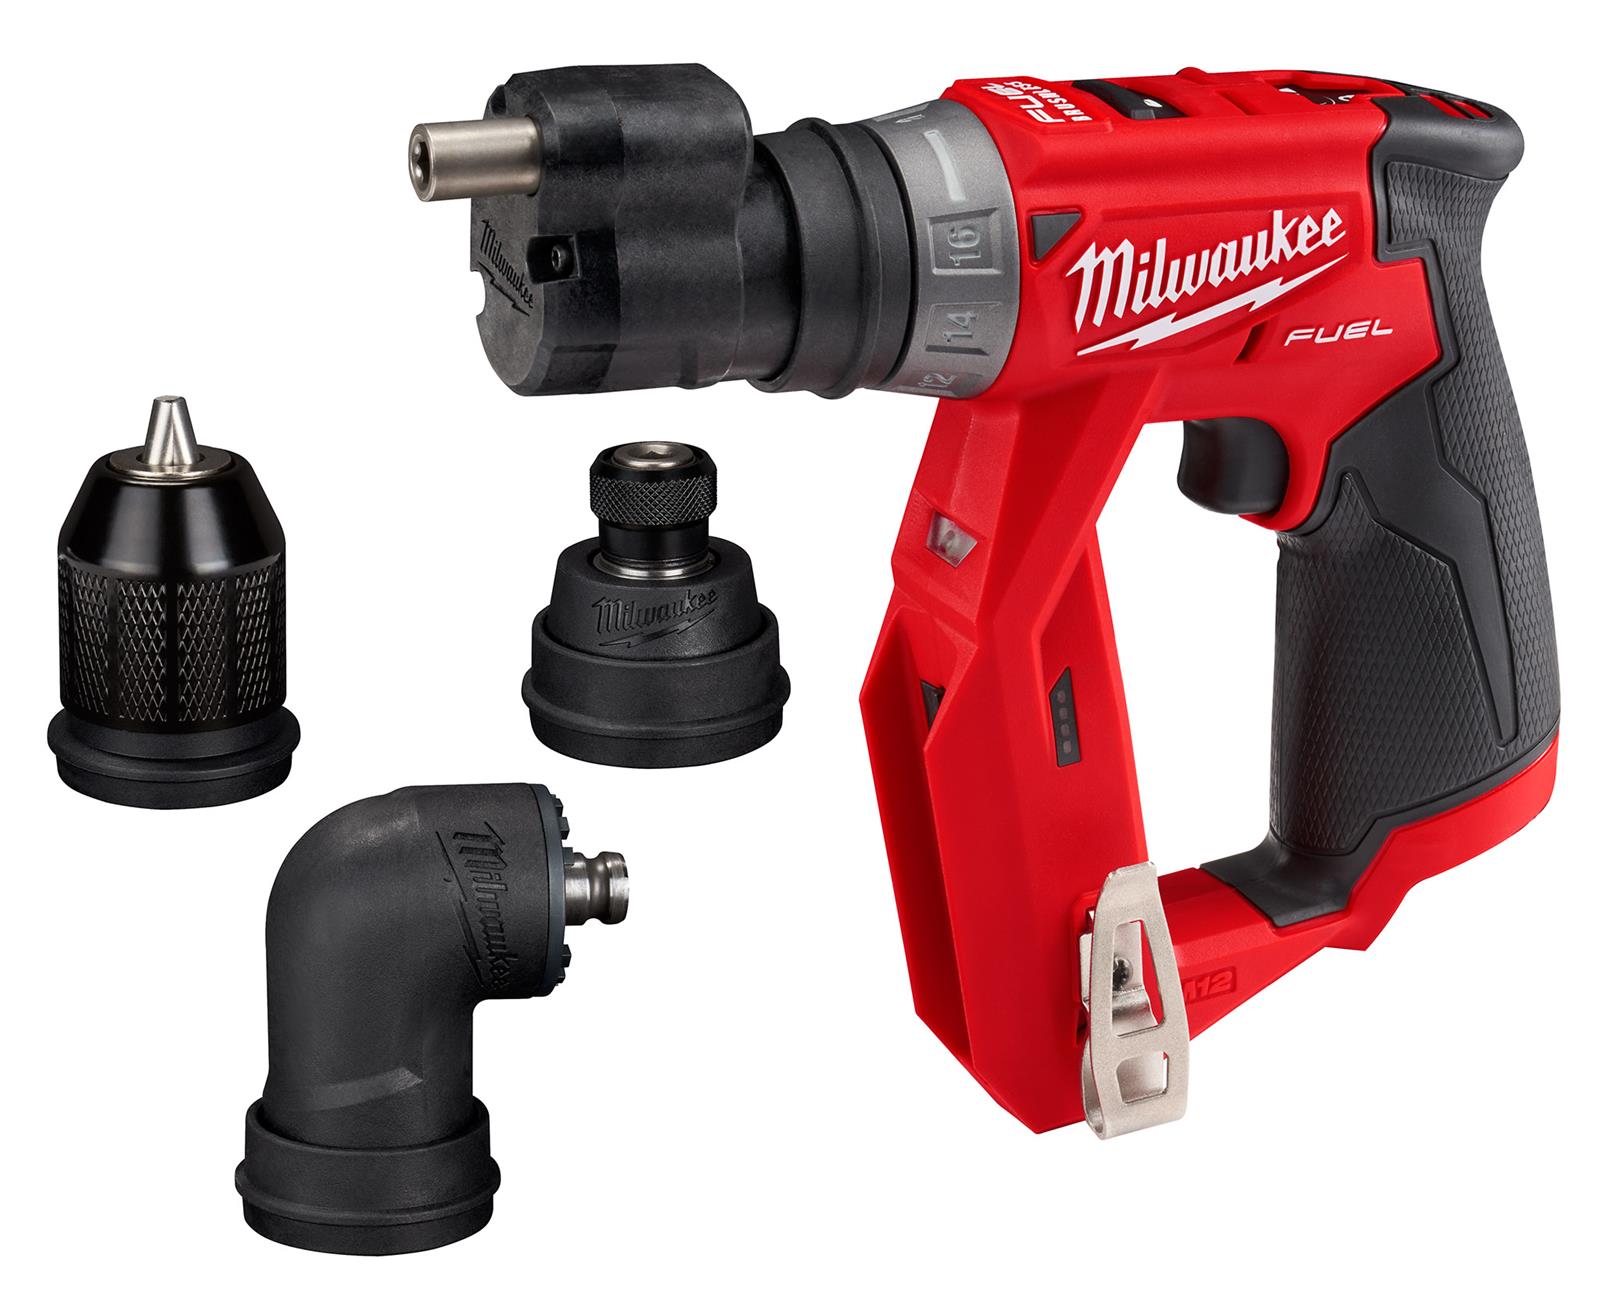 New Milwaukee M12 FUEL Installation Drill/Driver 4-in-1 attachments 2505-20 